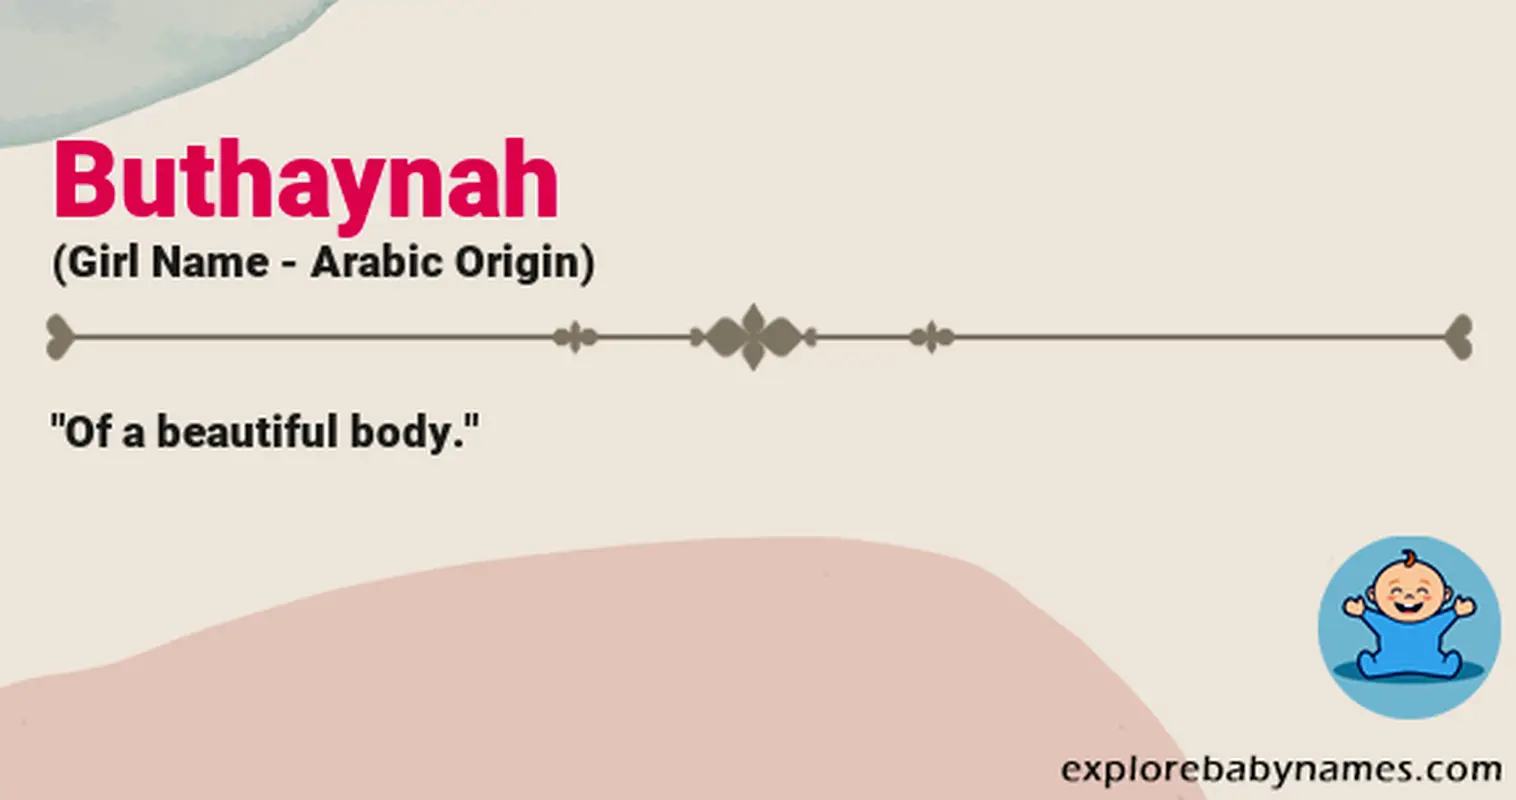 Meaning of Buthaynah